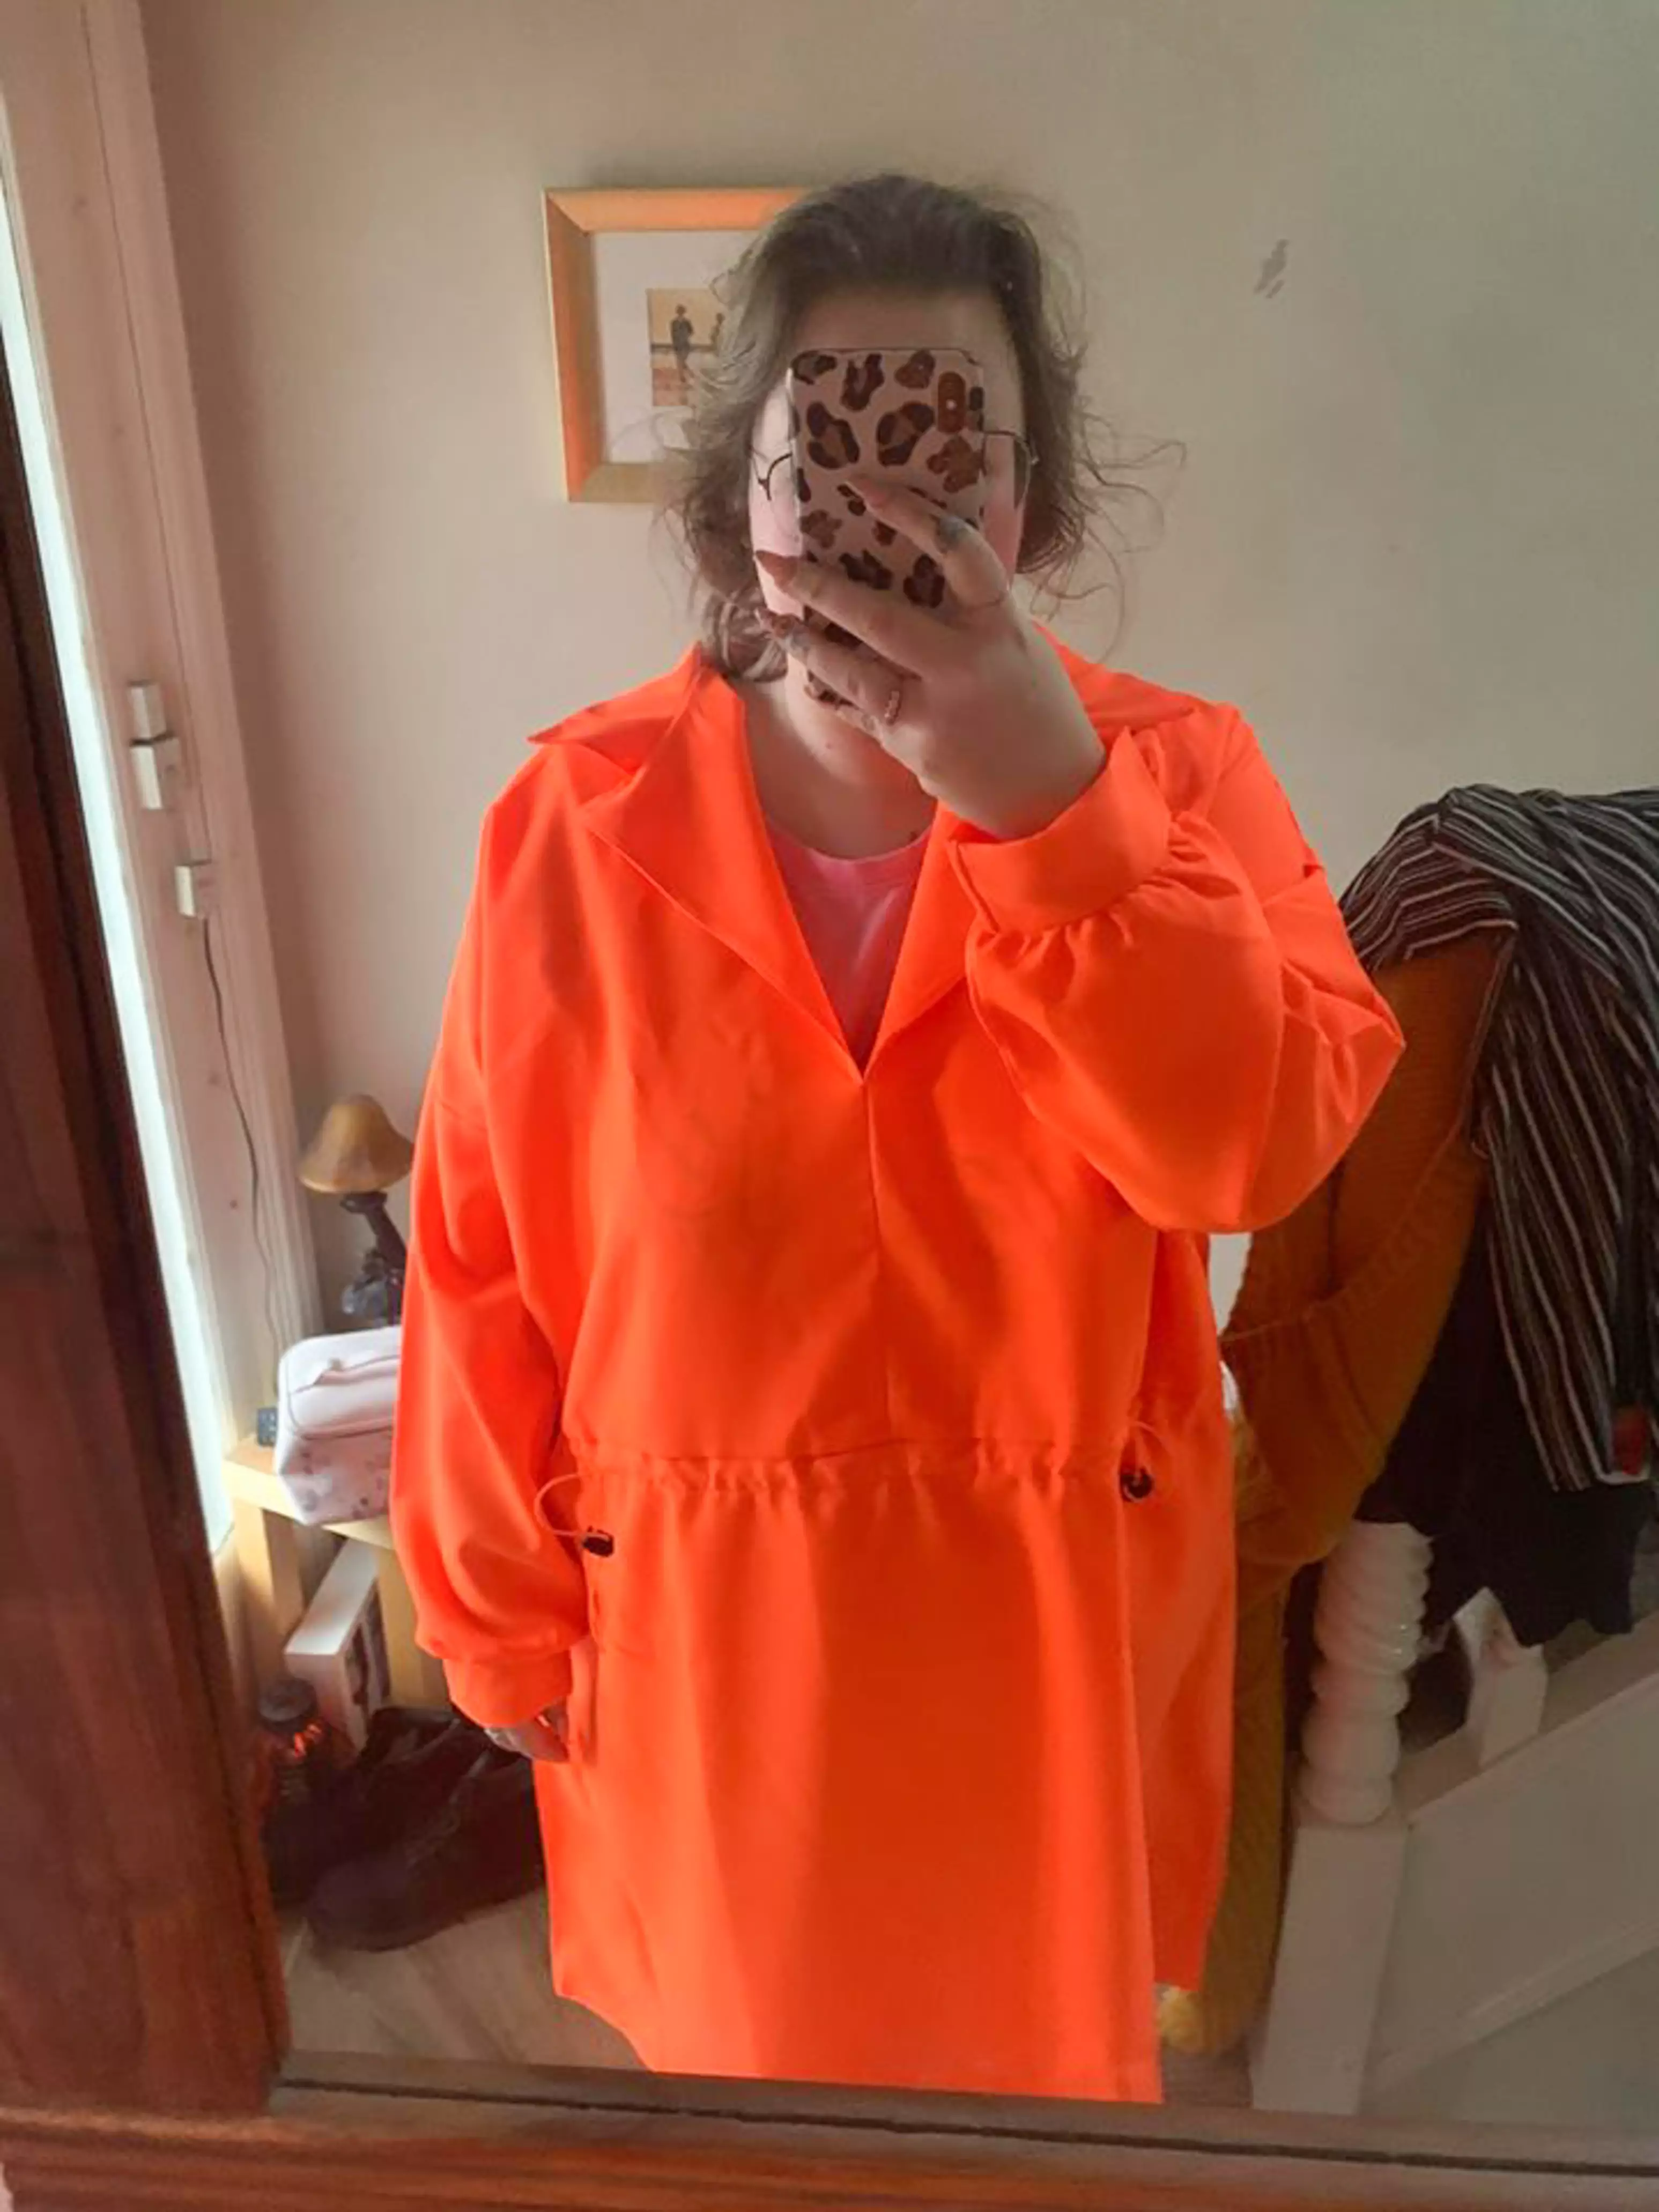 Beth ordered a dress and ended up with a garment resembling a 'high vis jacket' (